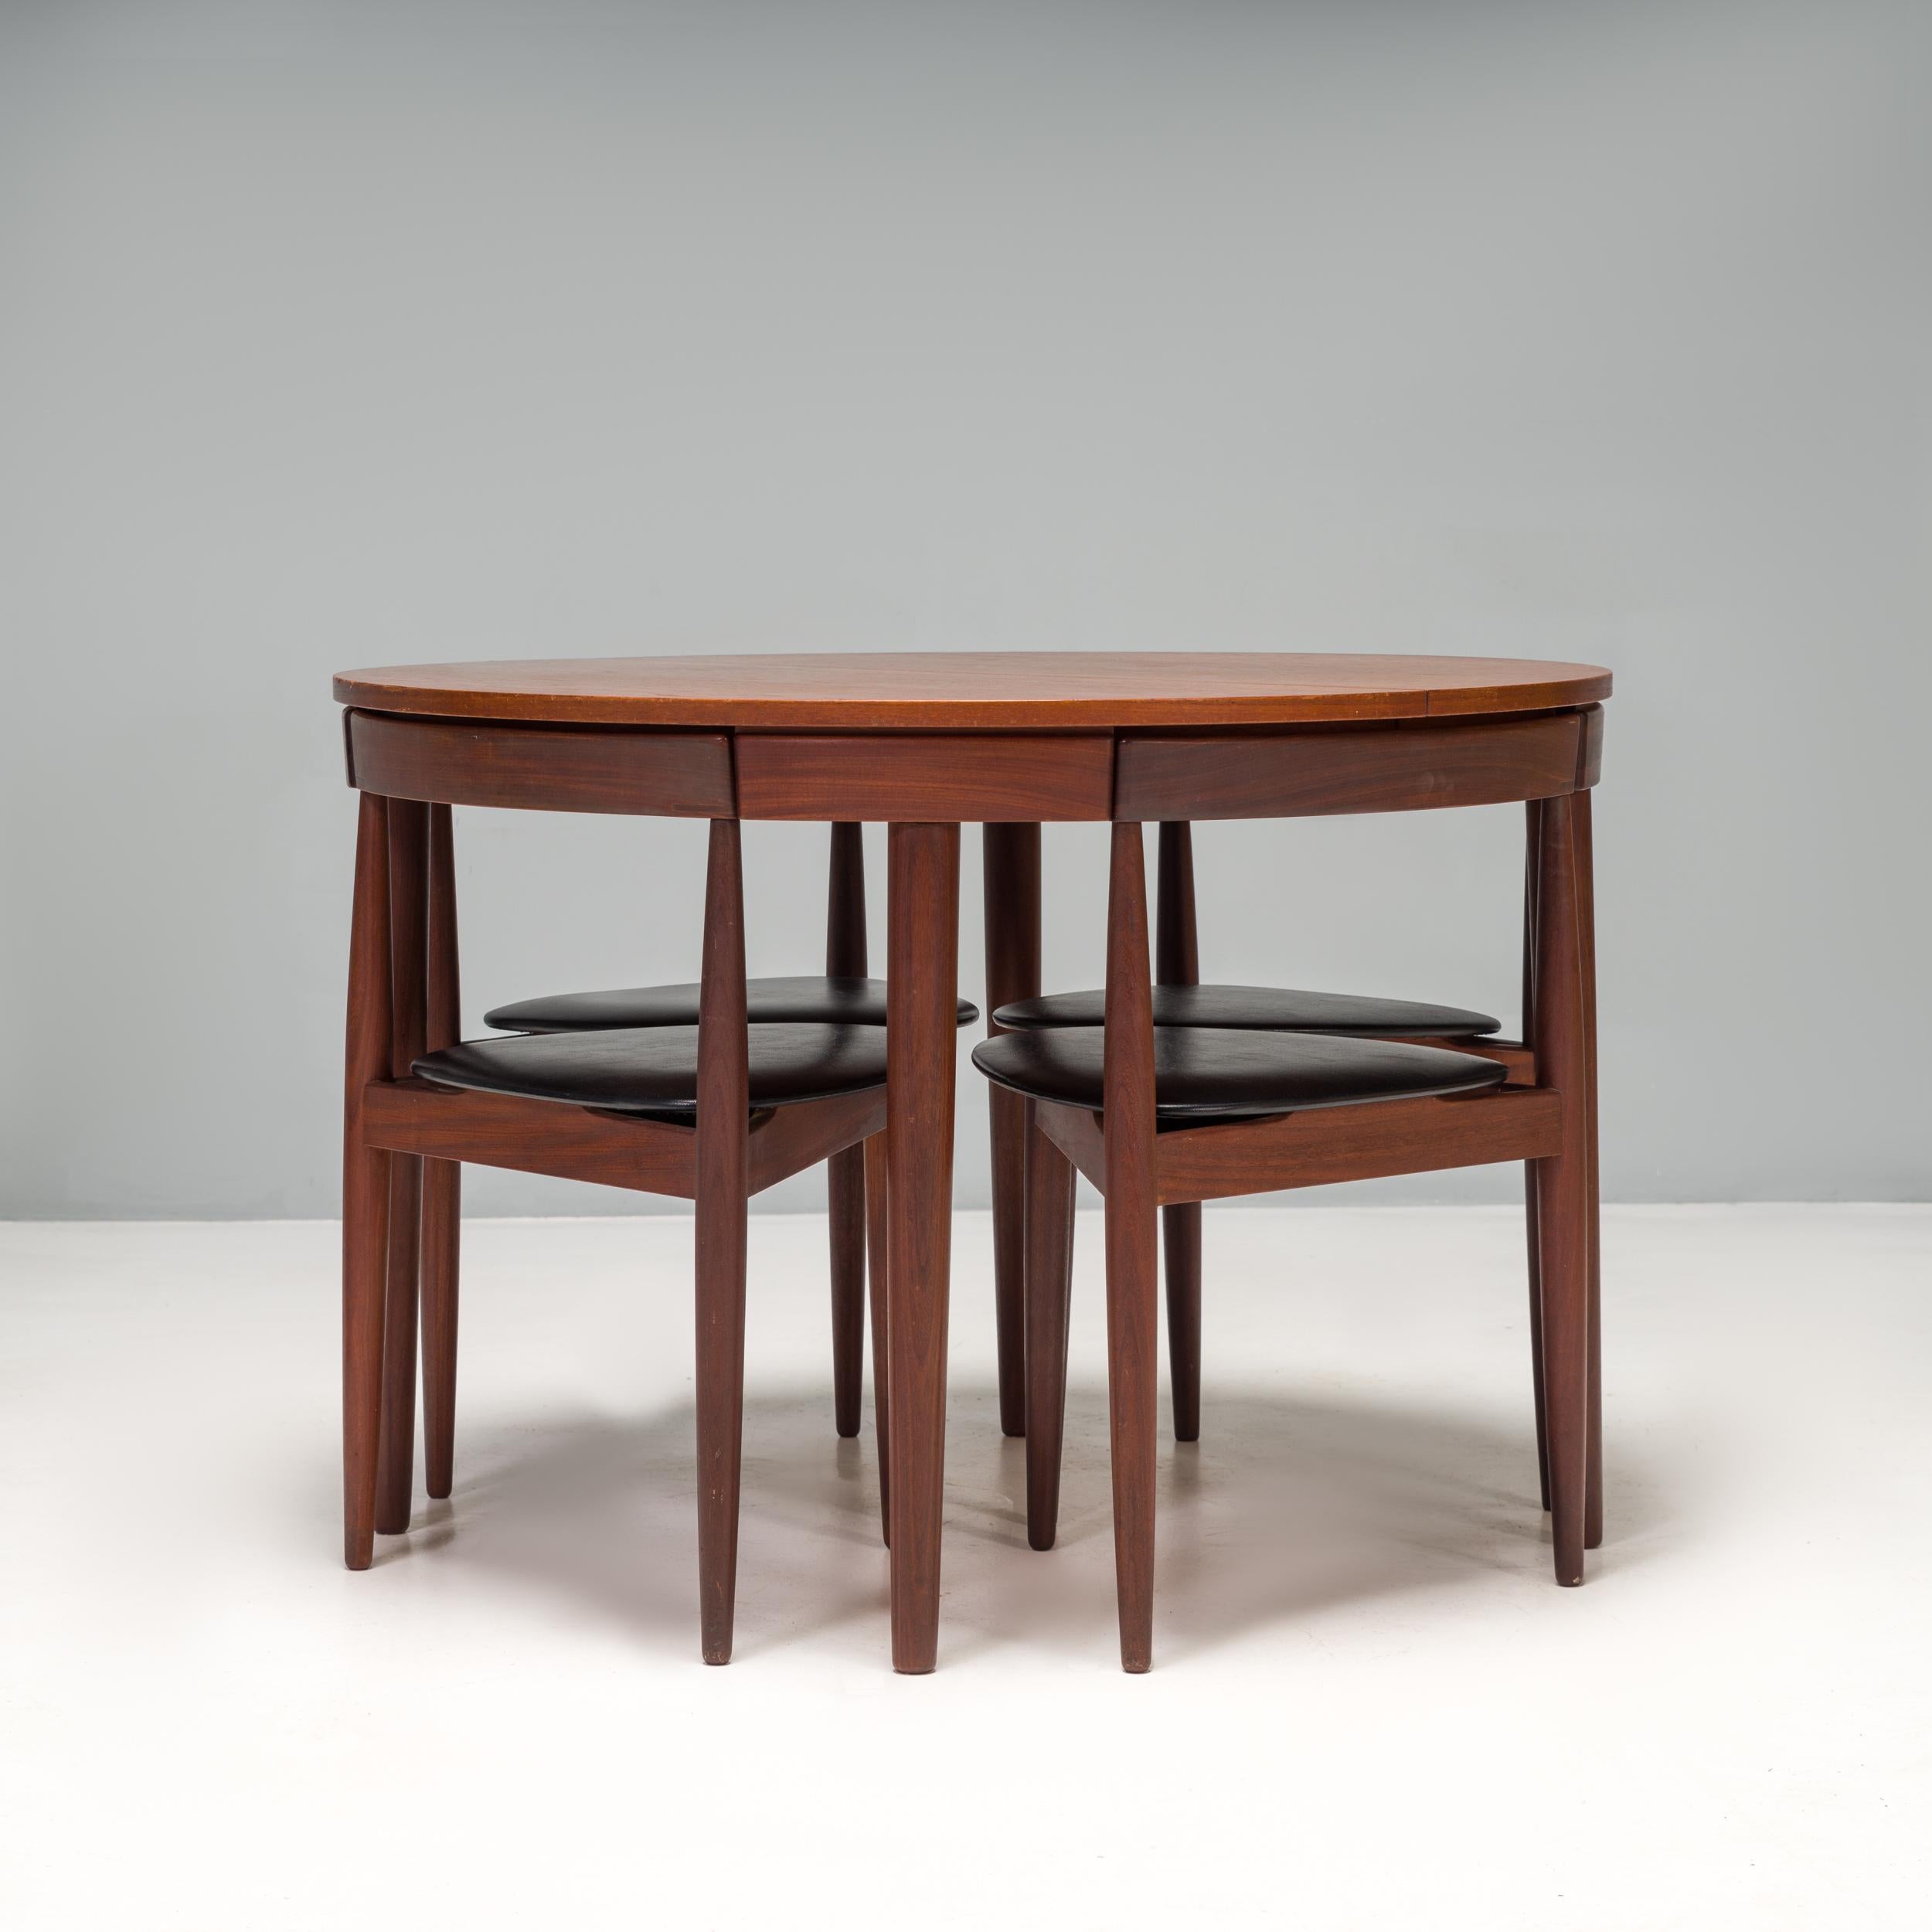 Designed by Hans Olsen, this 1960s dining table and chairs set is a fantastic example of mid century Danish design.

Comprising of a ‘roundette’ style table and 6 matching dining chairs, the set is constructed from teak wood.

The table top